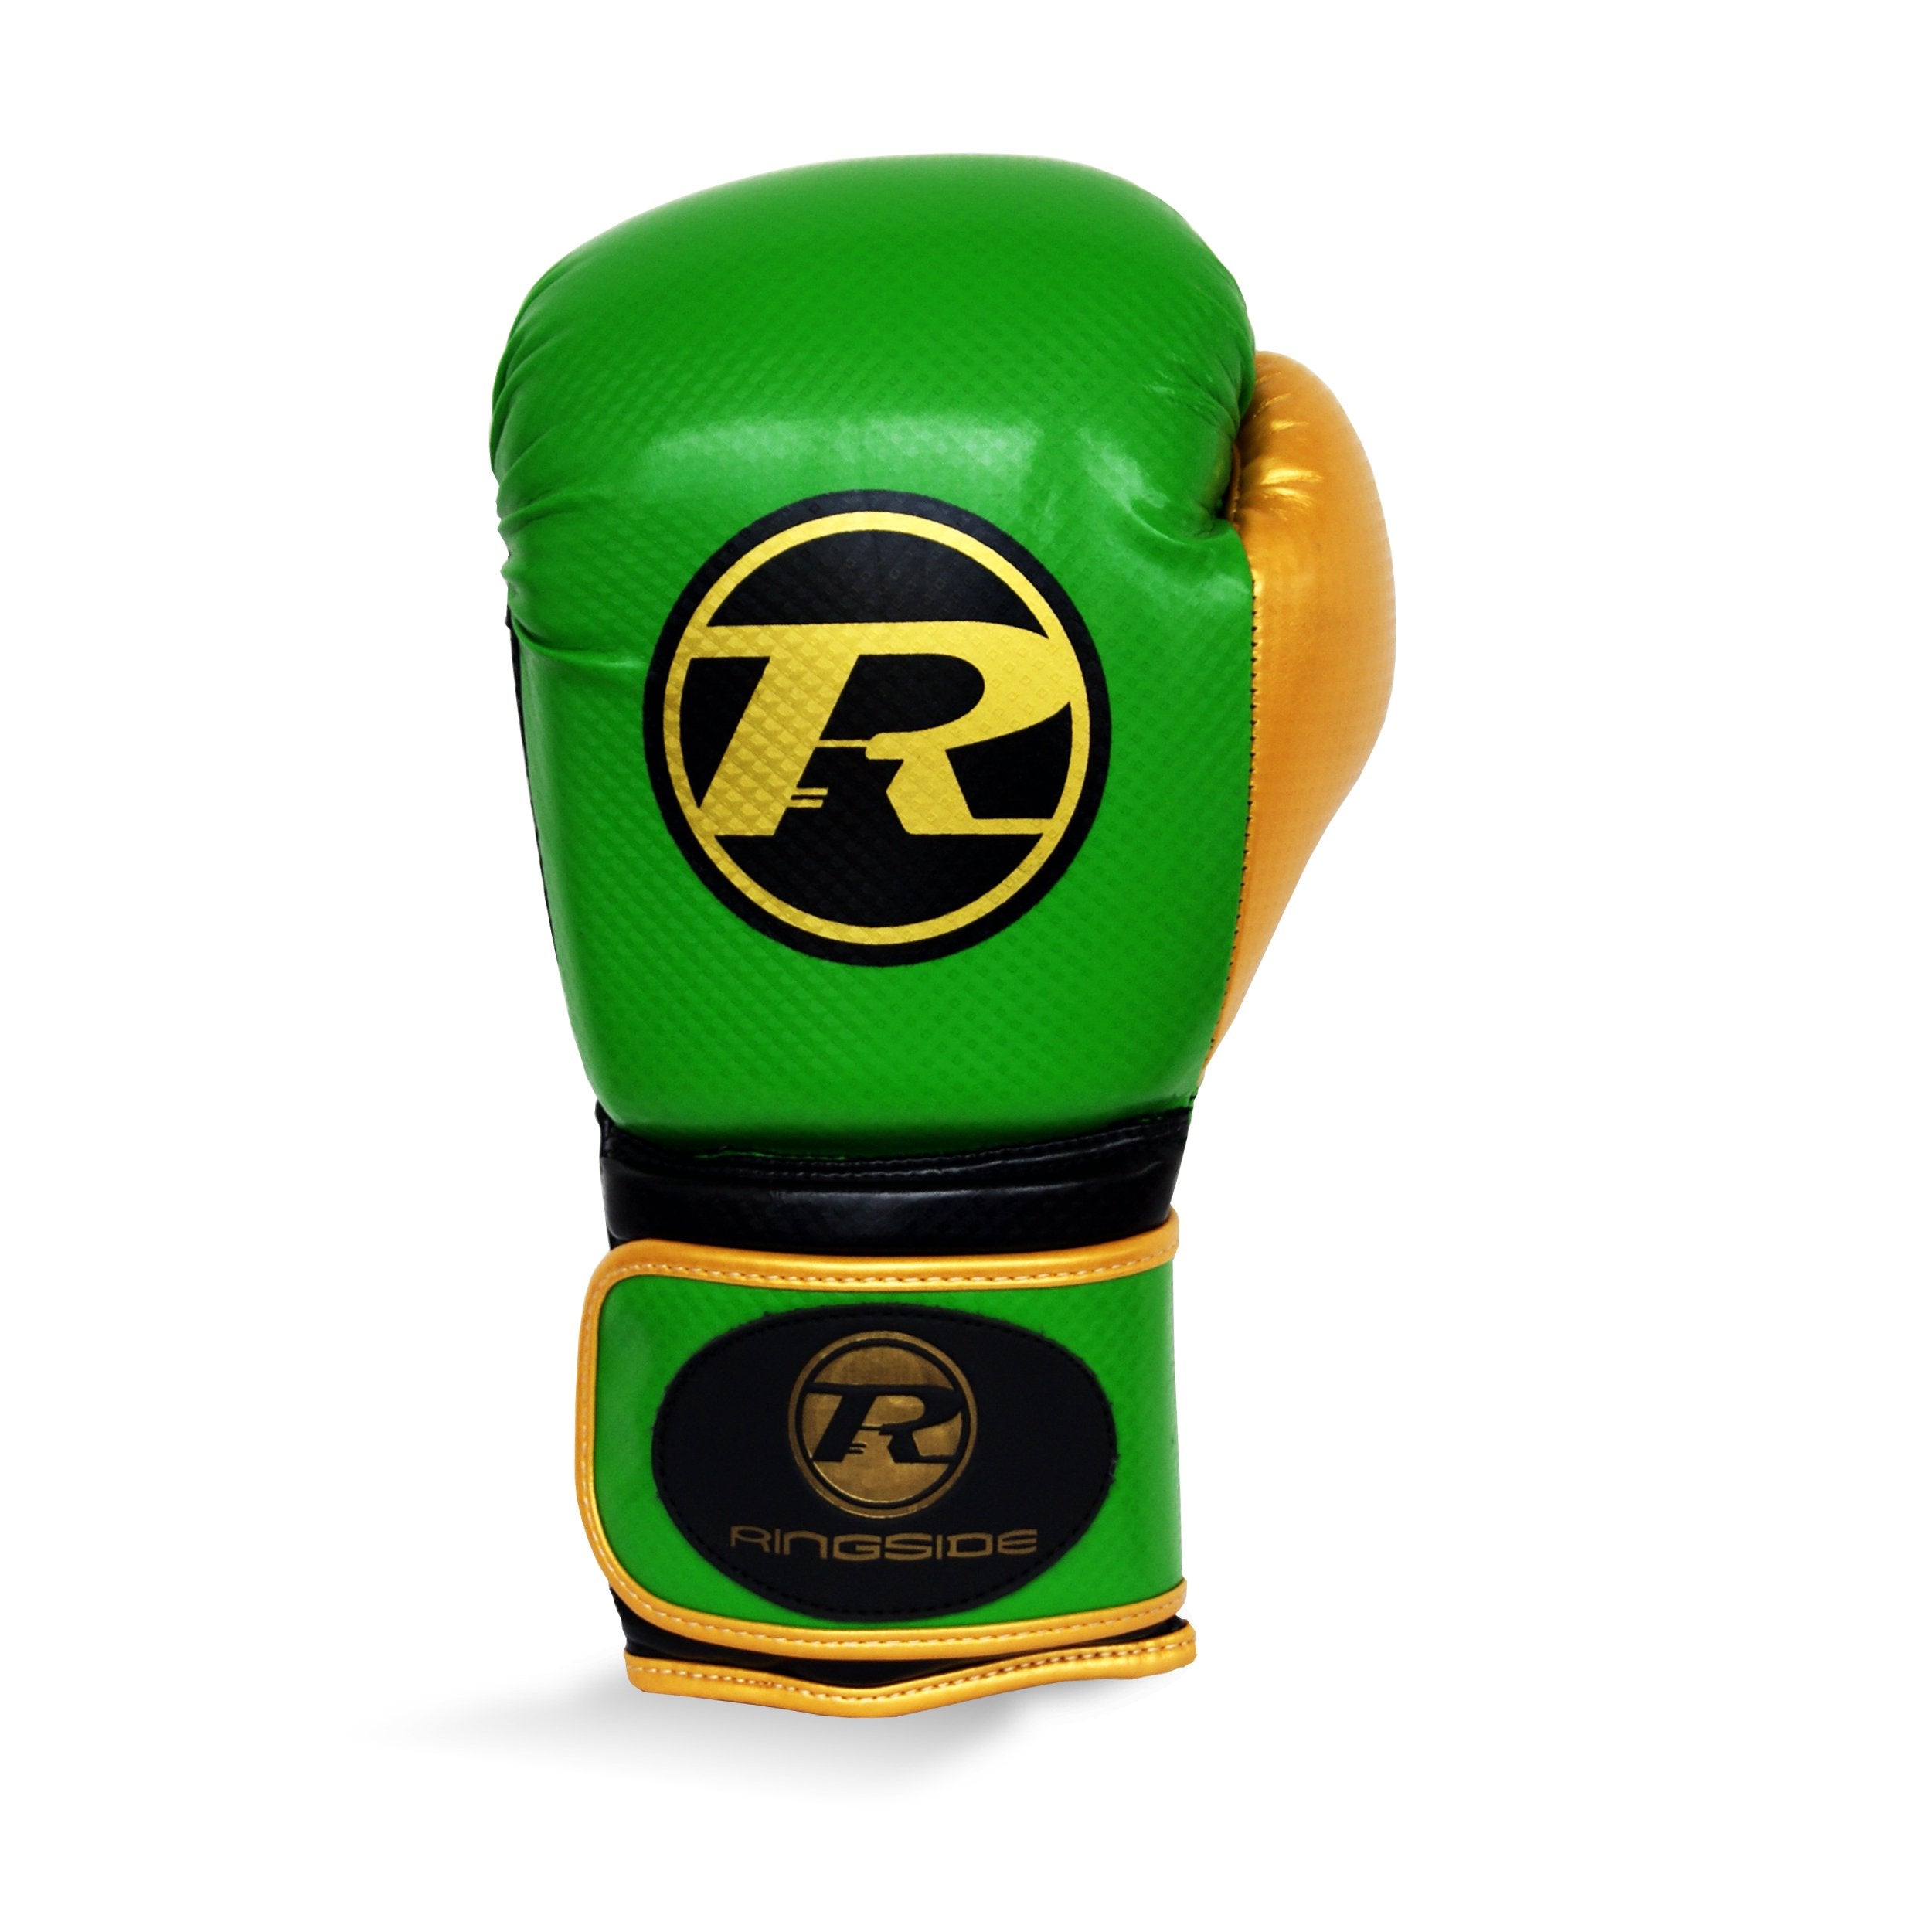 Pro Fitness Synthetic Leather Boxing Glove Metallic Green / Black / Gold